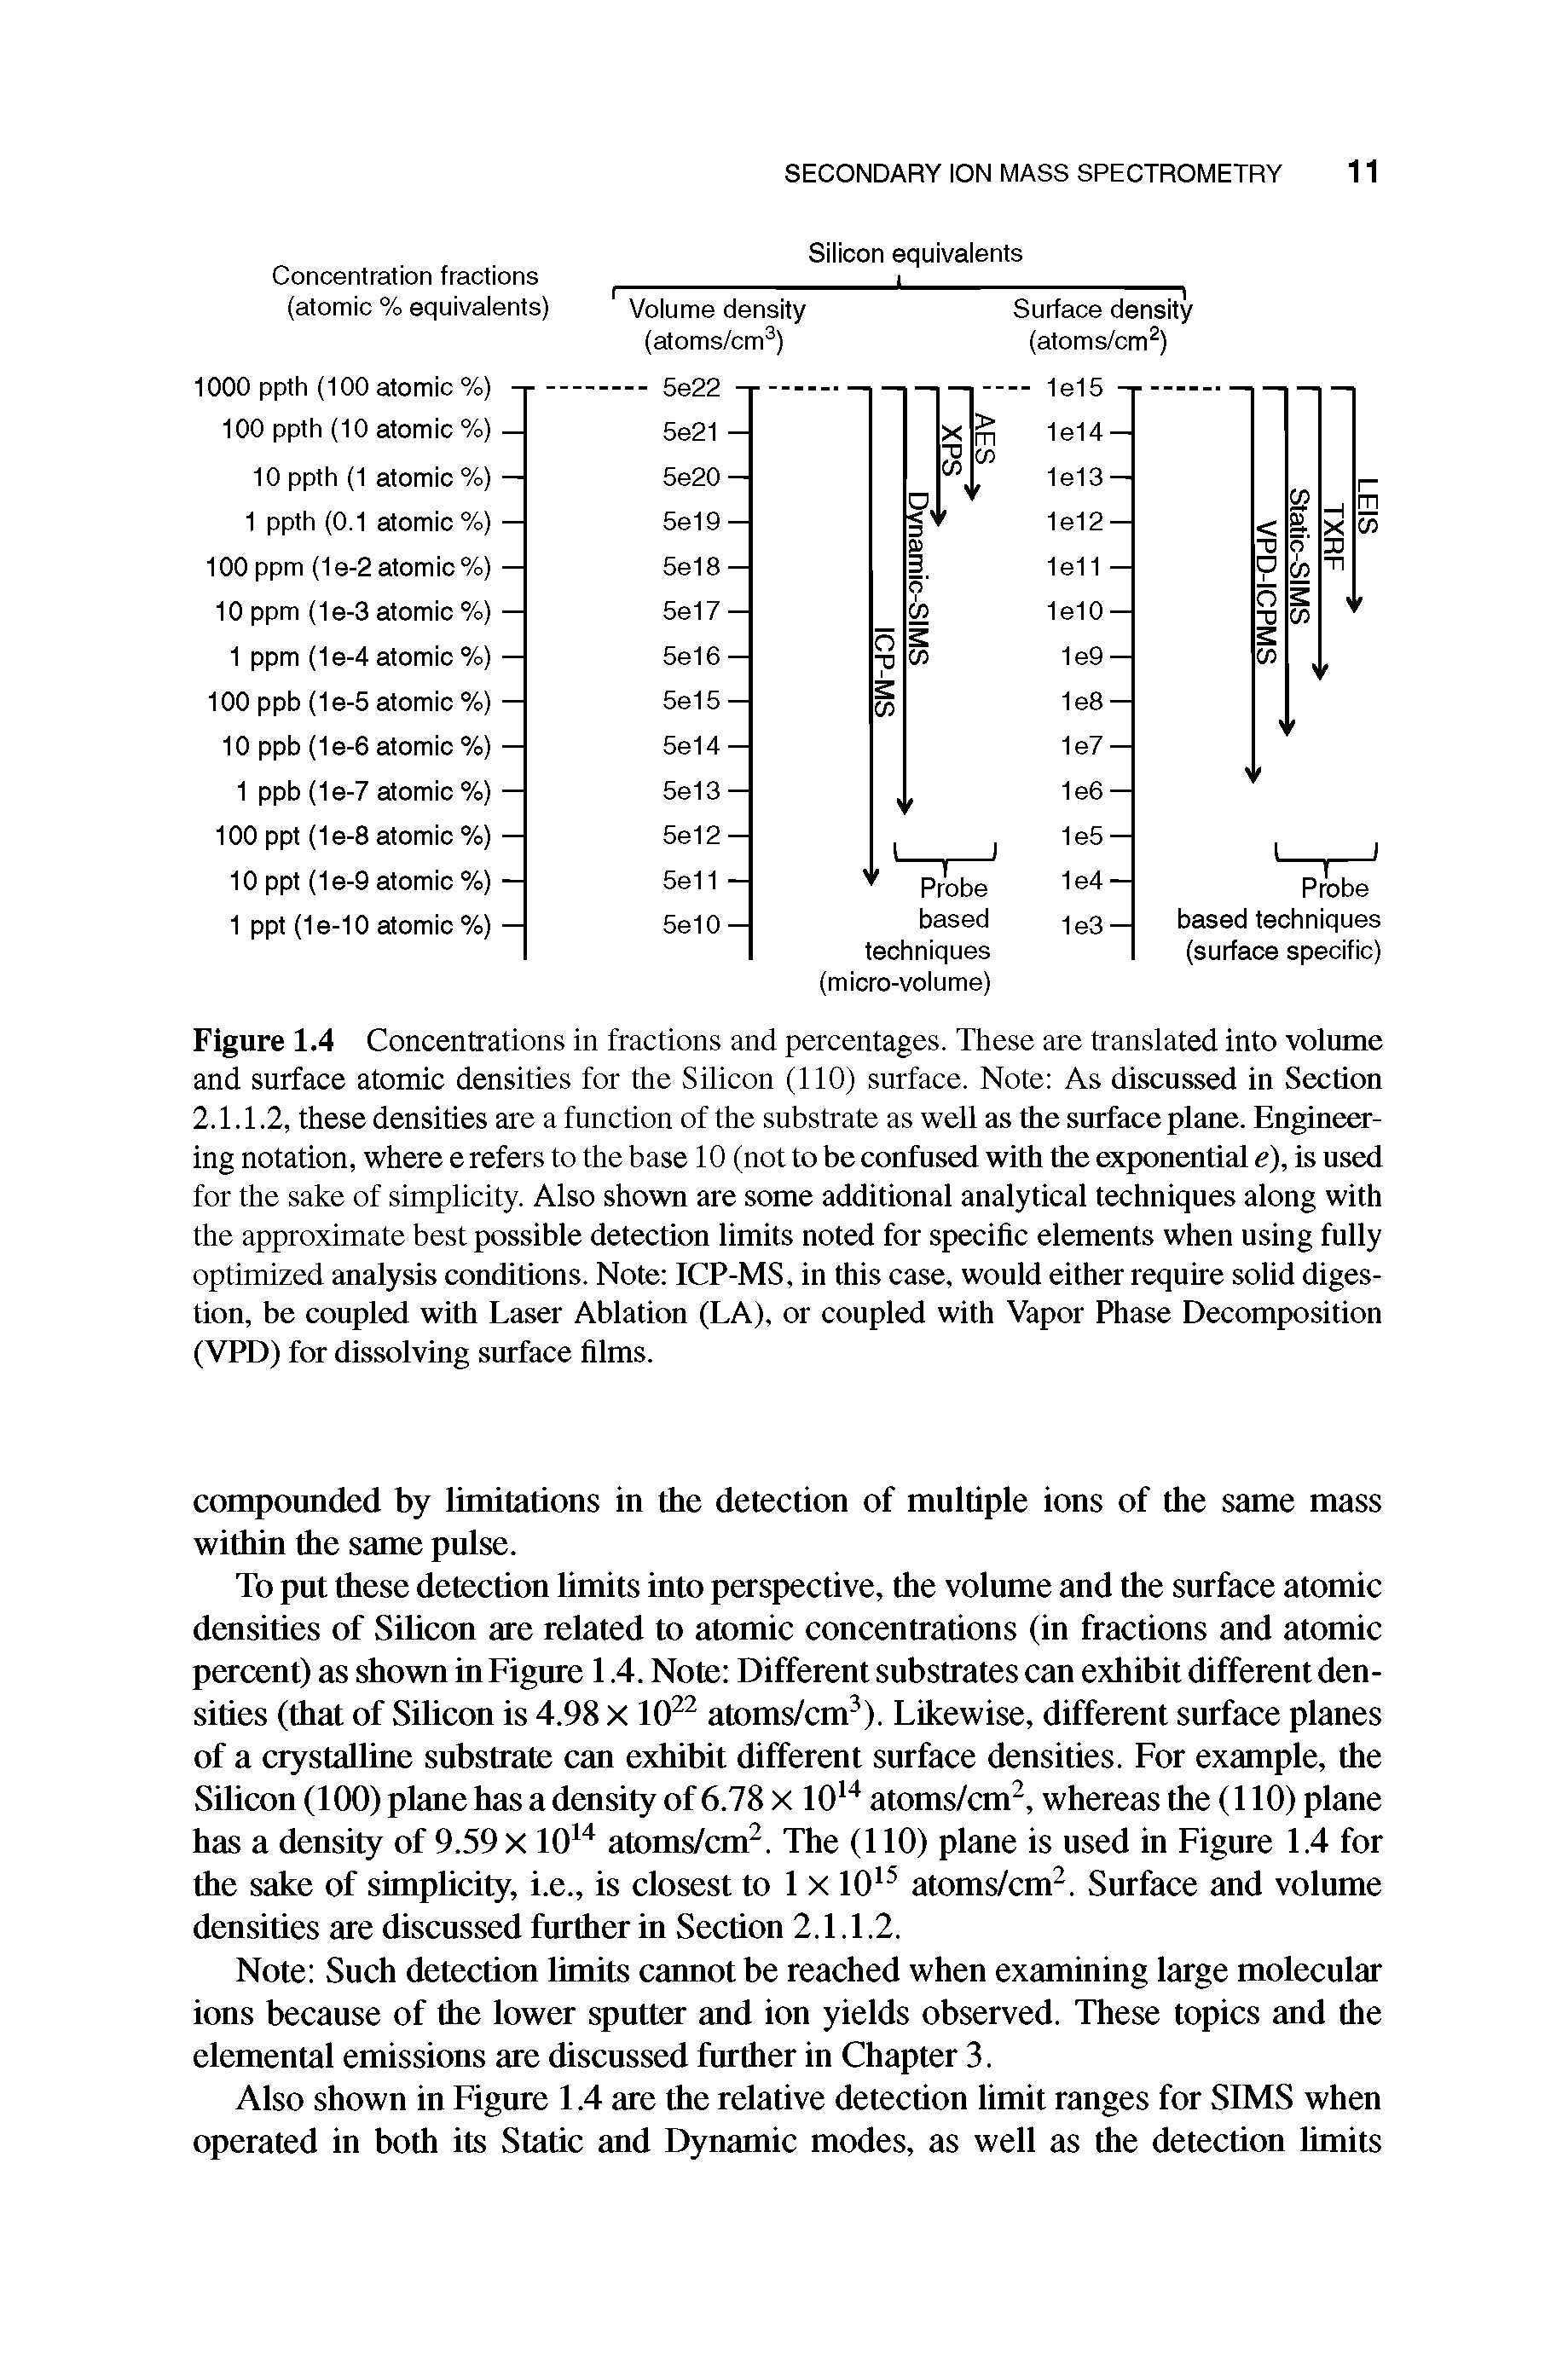 Figure 1.4 Concentrations in fractions and percentages. These are translated into volume and surface atomic densities for the Silicon (110) surface. Note As discussed in Section 2.1.1.2, these densities are a function of the substrate as well as the surface plane. Engineering notation, where e refers to the base 10 (not to be confused with the exponential e), is nsed for the sake of simplicity. Also shown are some additional analytical techniques along with the approximate best possible detection limits noted for specific elements when using fully optimized analysis conditions. Note ICP-MS, in this case, would either require solid digestion, be coupled with Laser Ablation (LA), or coupled with Vapor Phase Decomposition (VPD) for dissolving surface films.